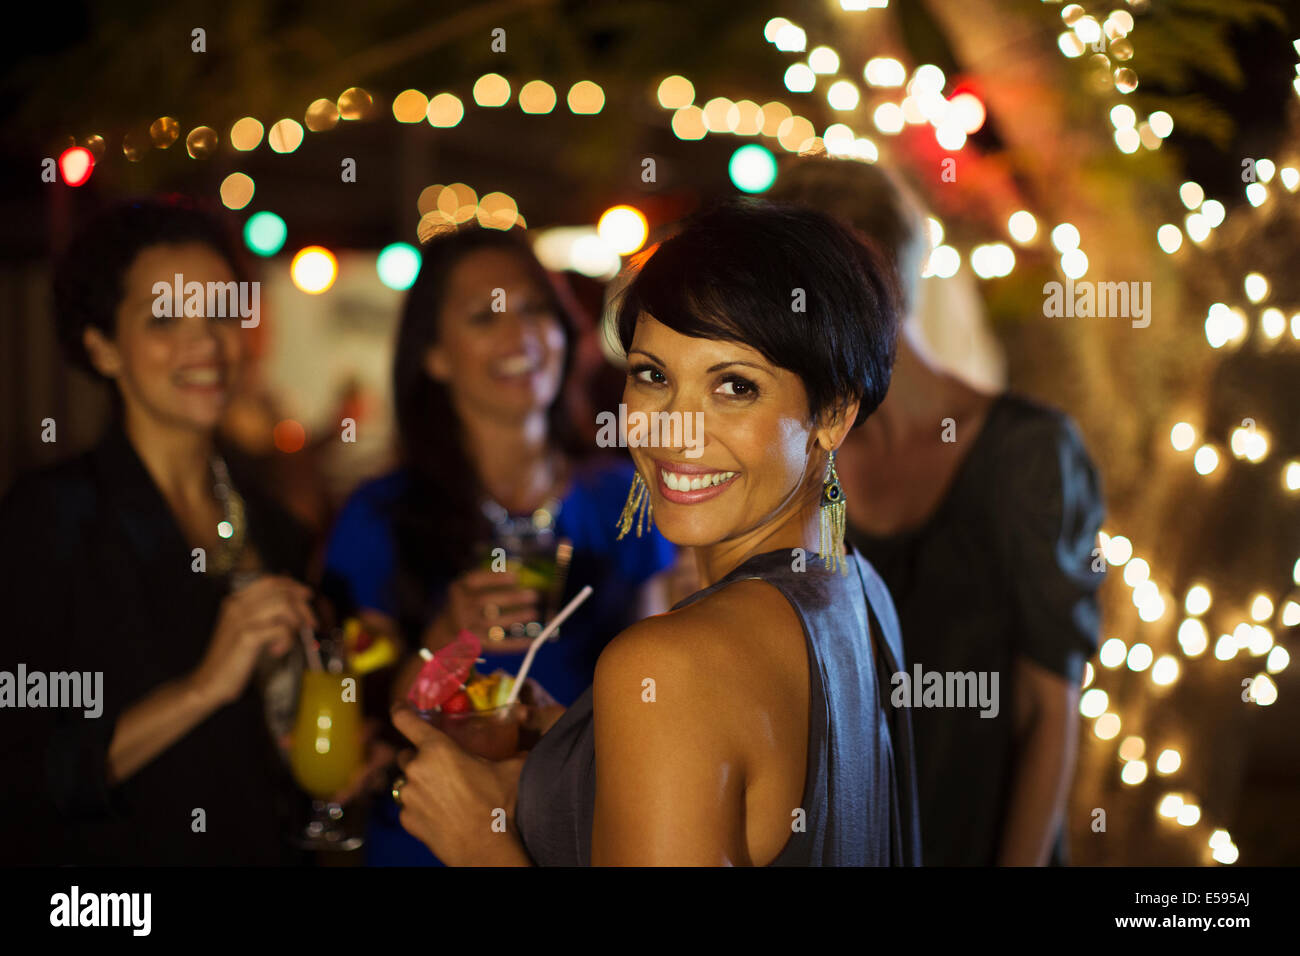 Woman smiling at party Banque D'Images